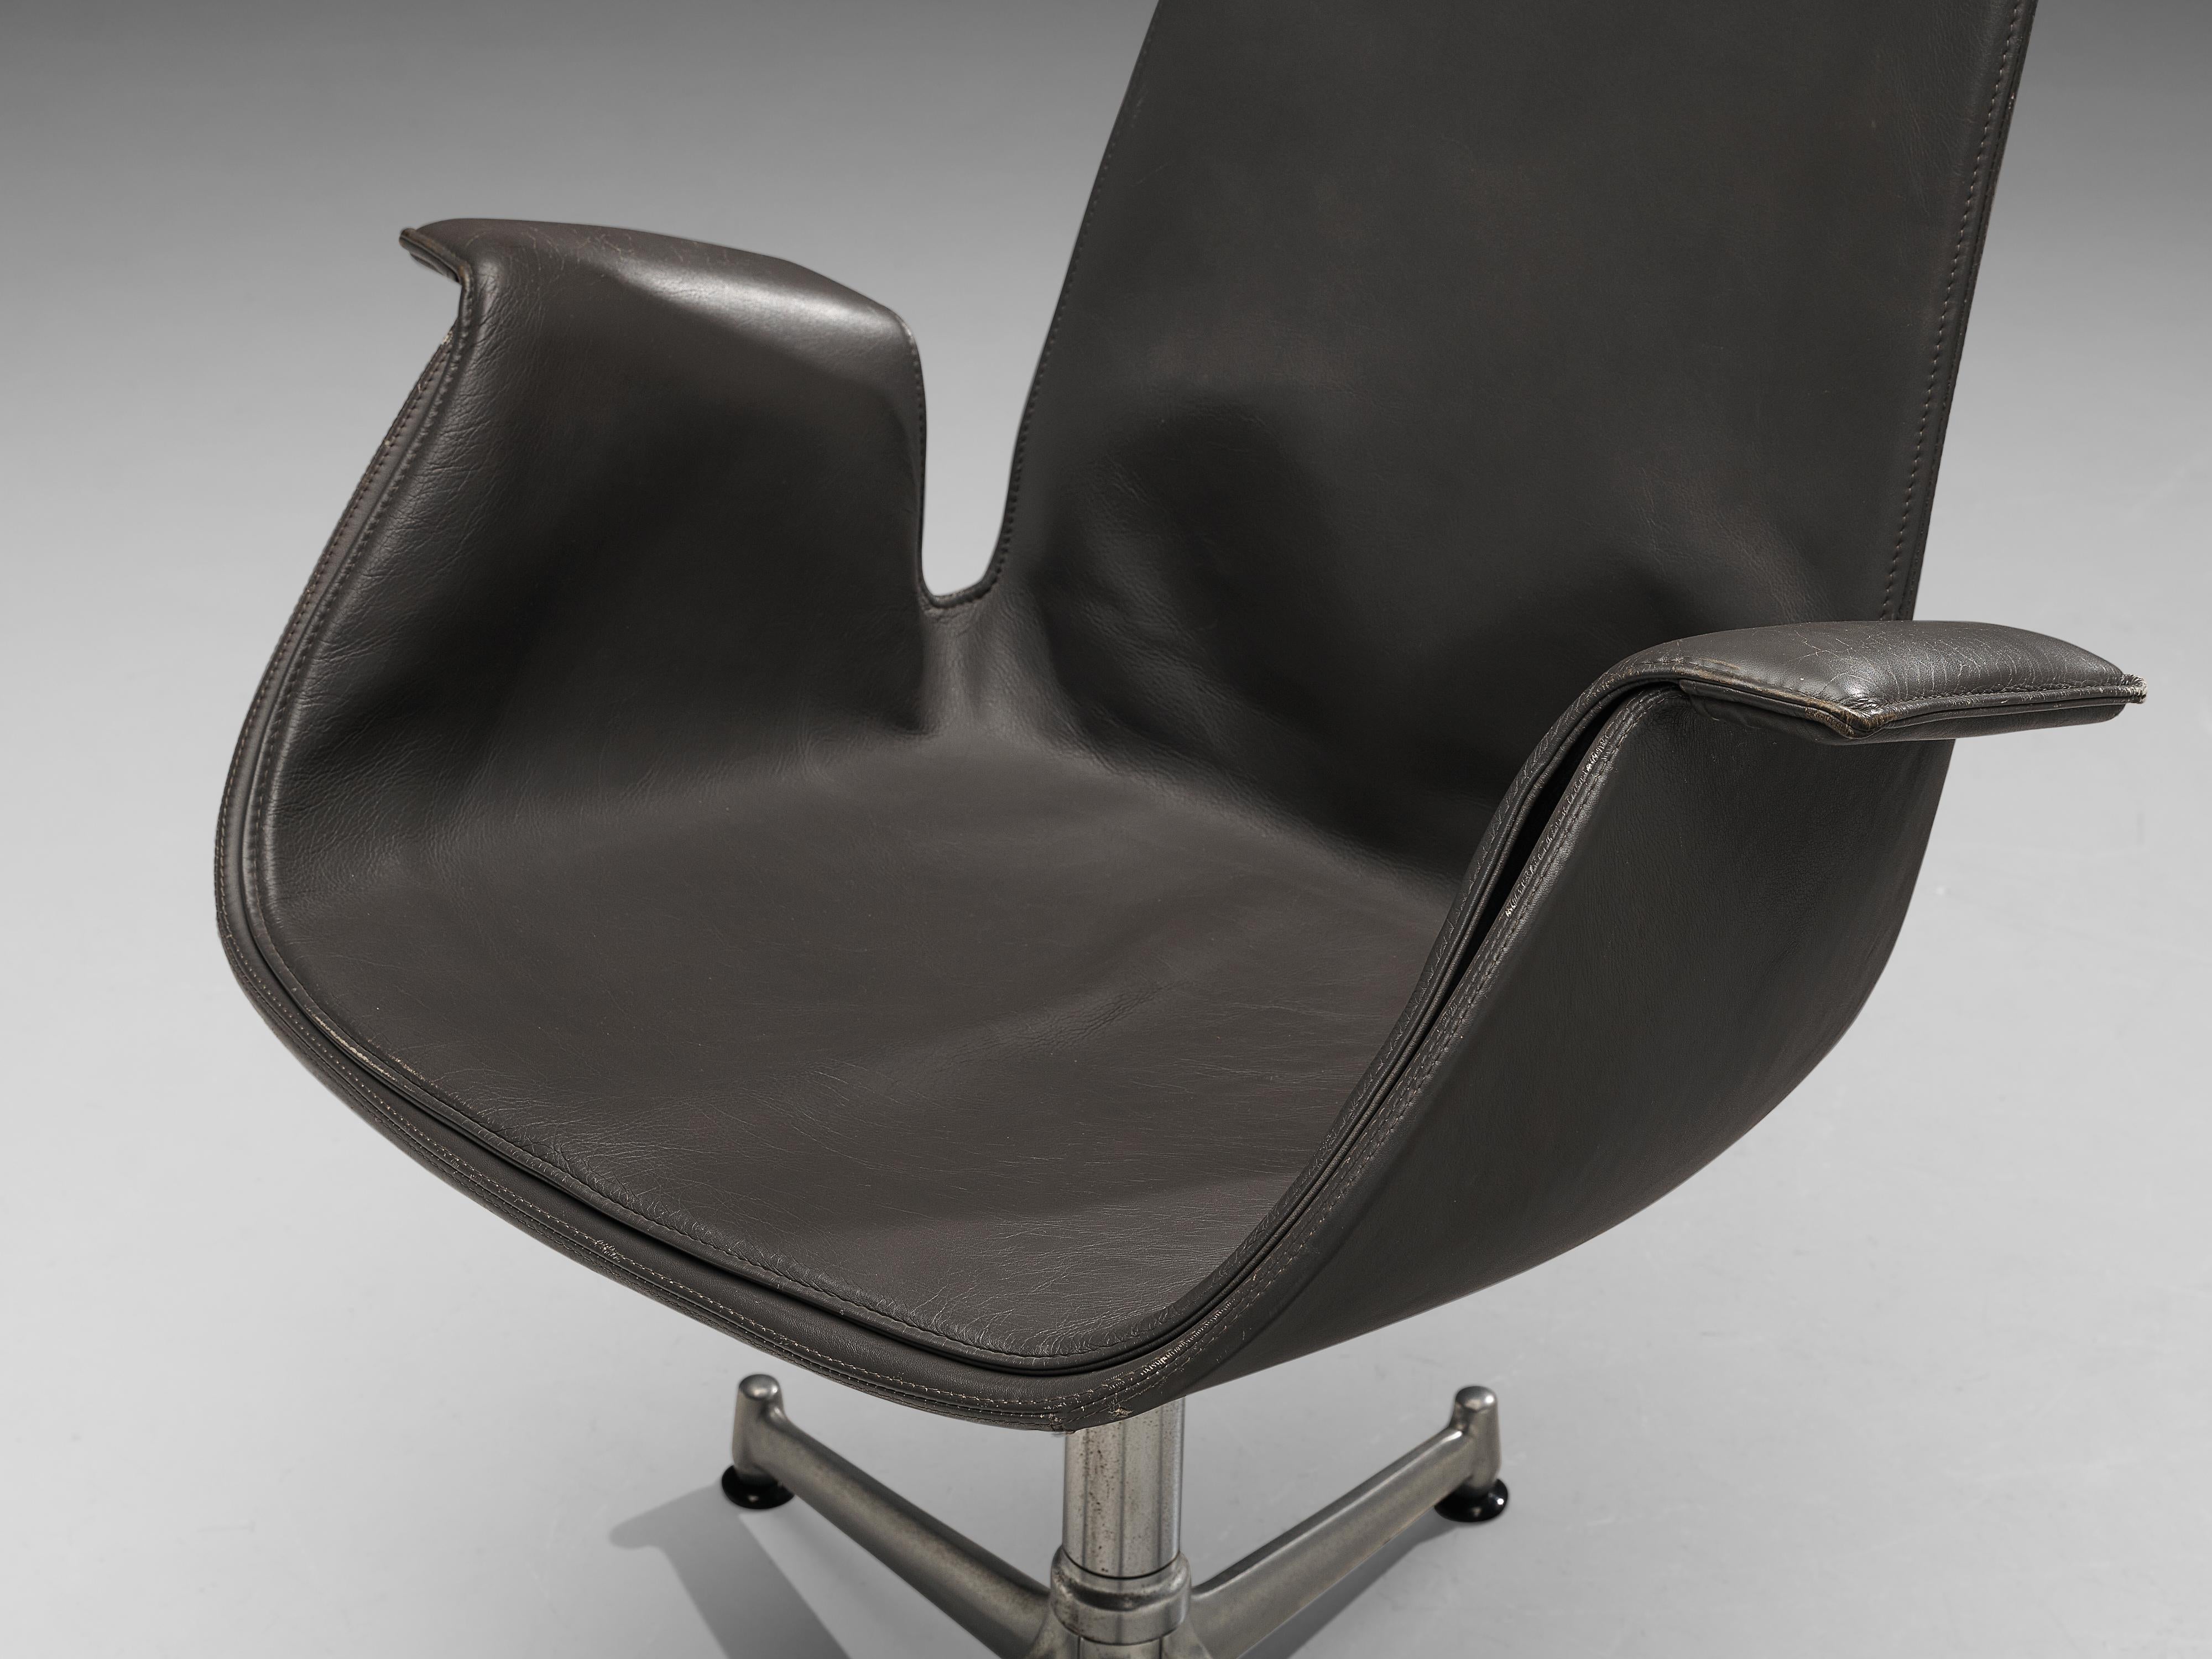 Fabricius & Kastholm Swivel Chair in Leather and Steel